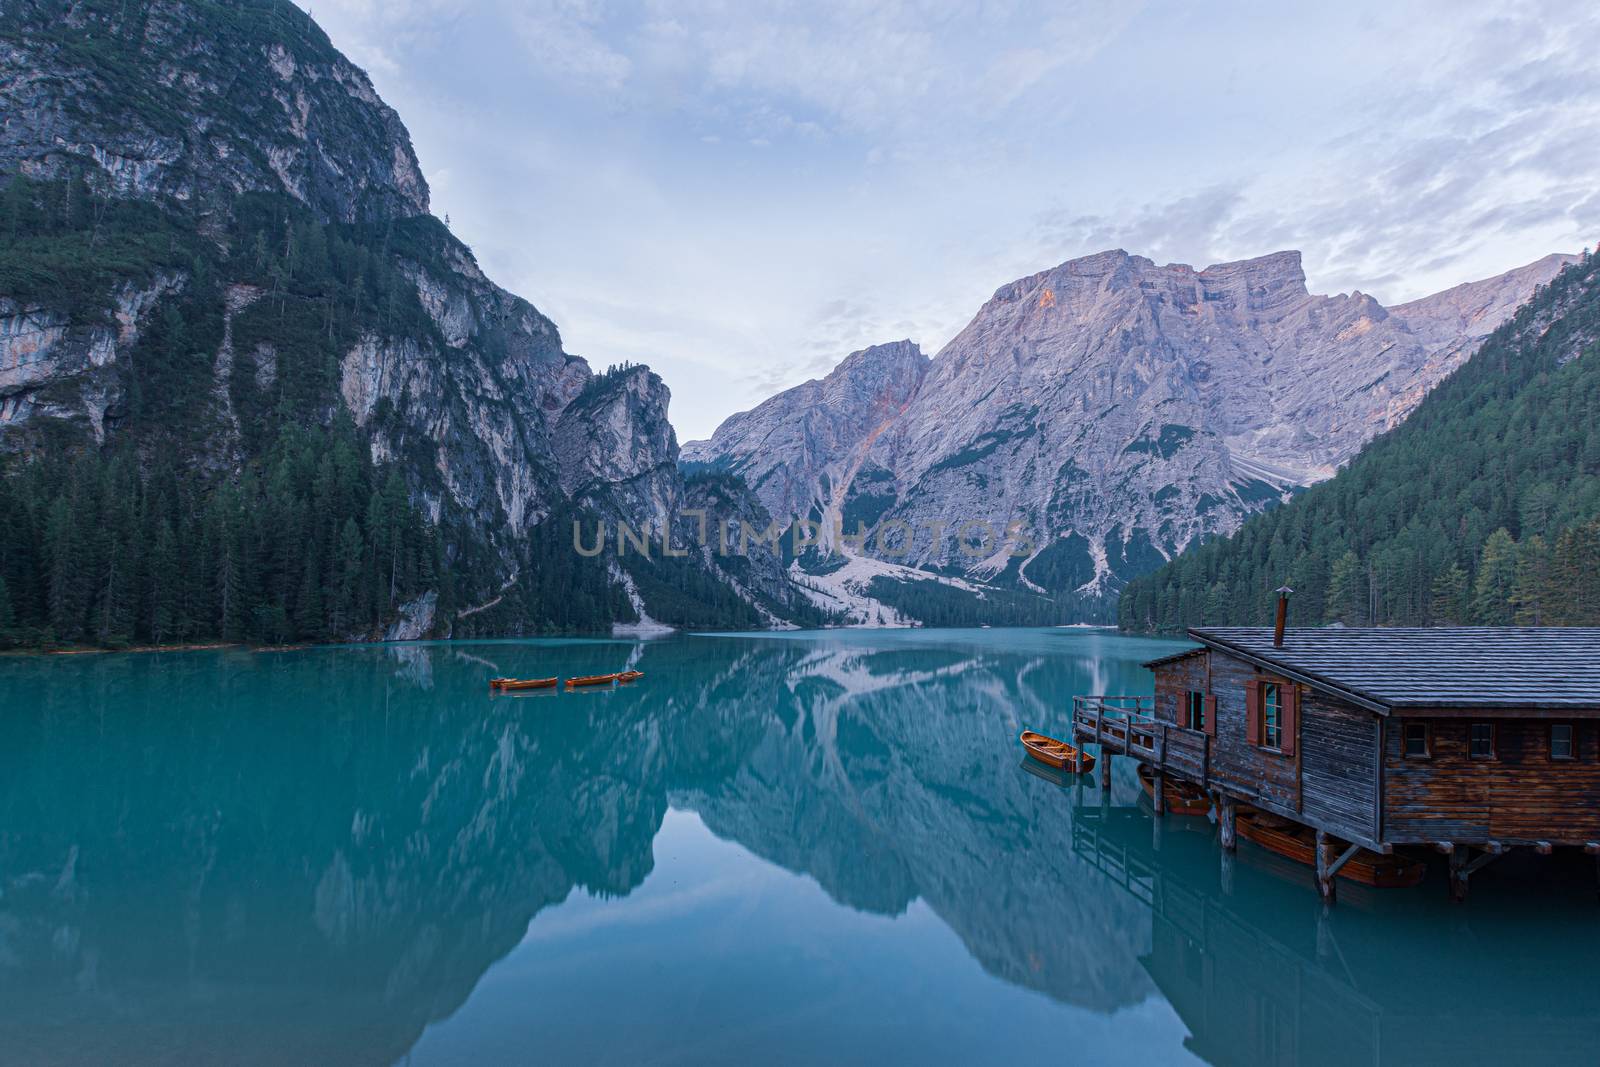 Mooring of boats on Lake Braies at first light in the morning by brambillasimone